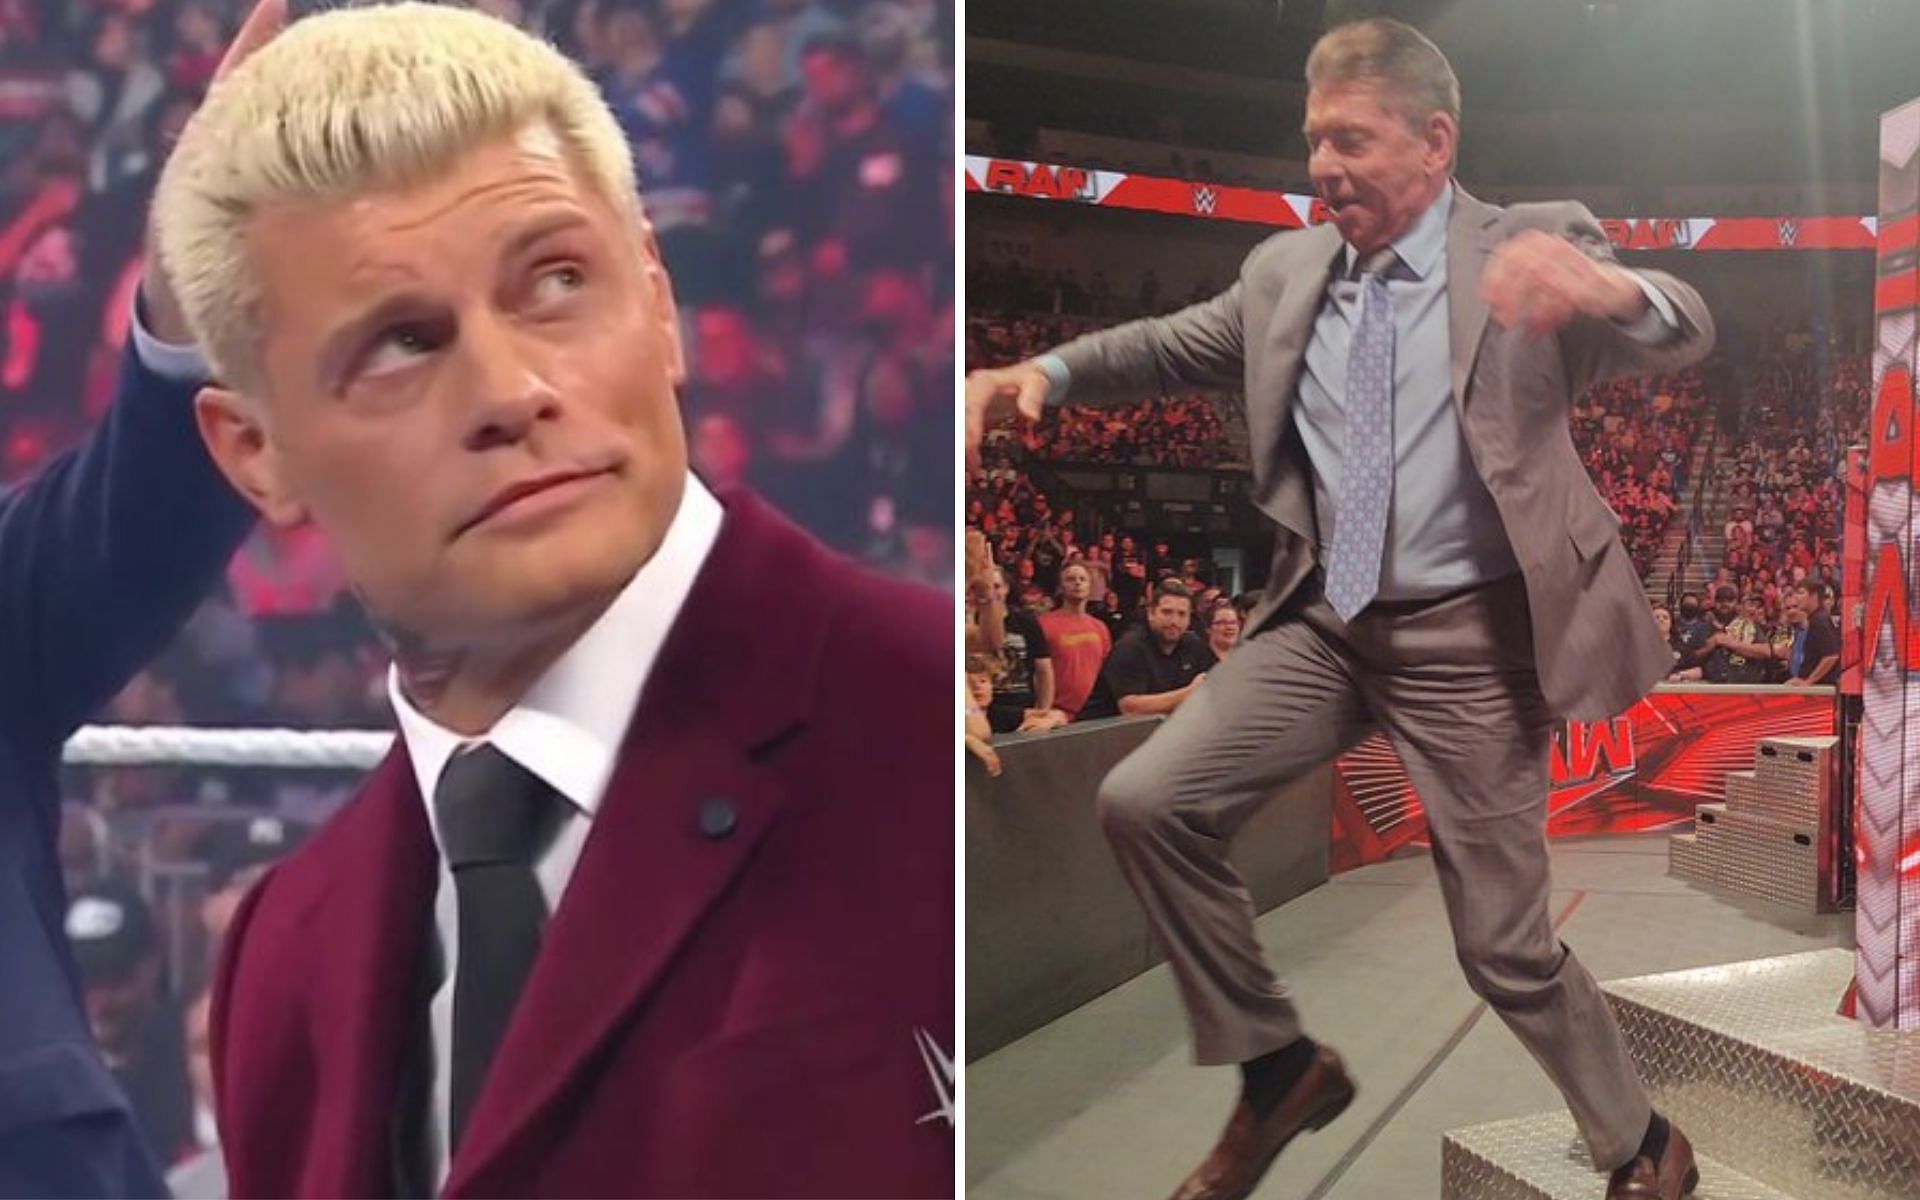 What do Cody Rhodes and Vince McMahon have in common?